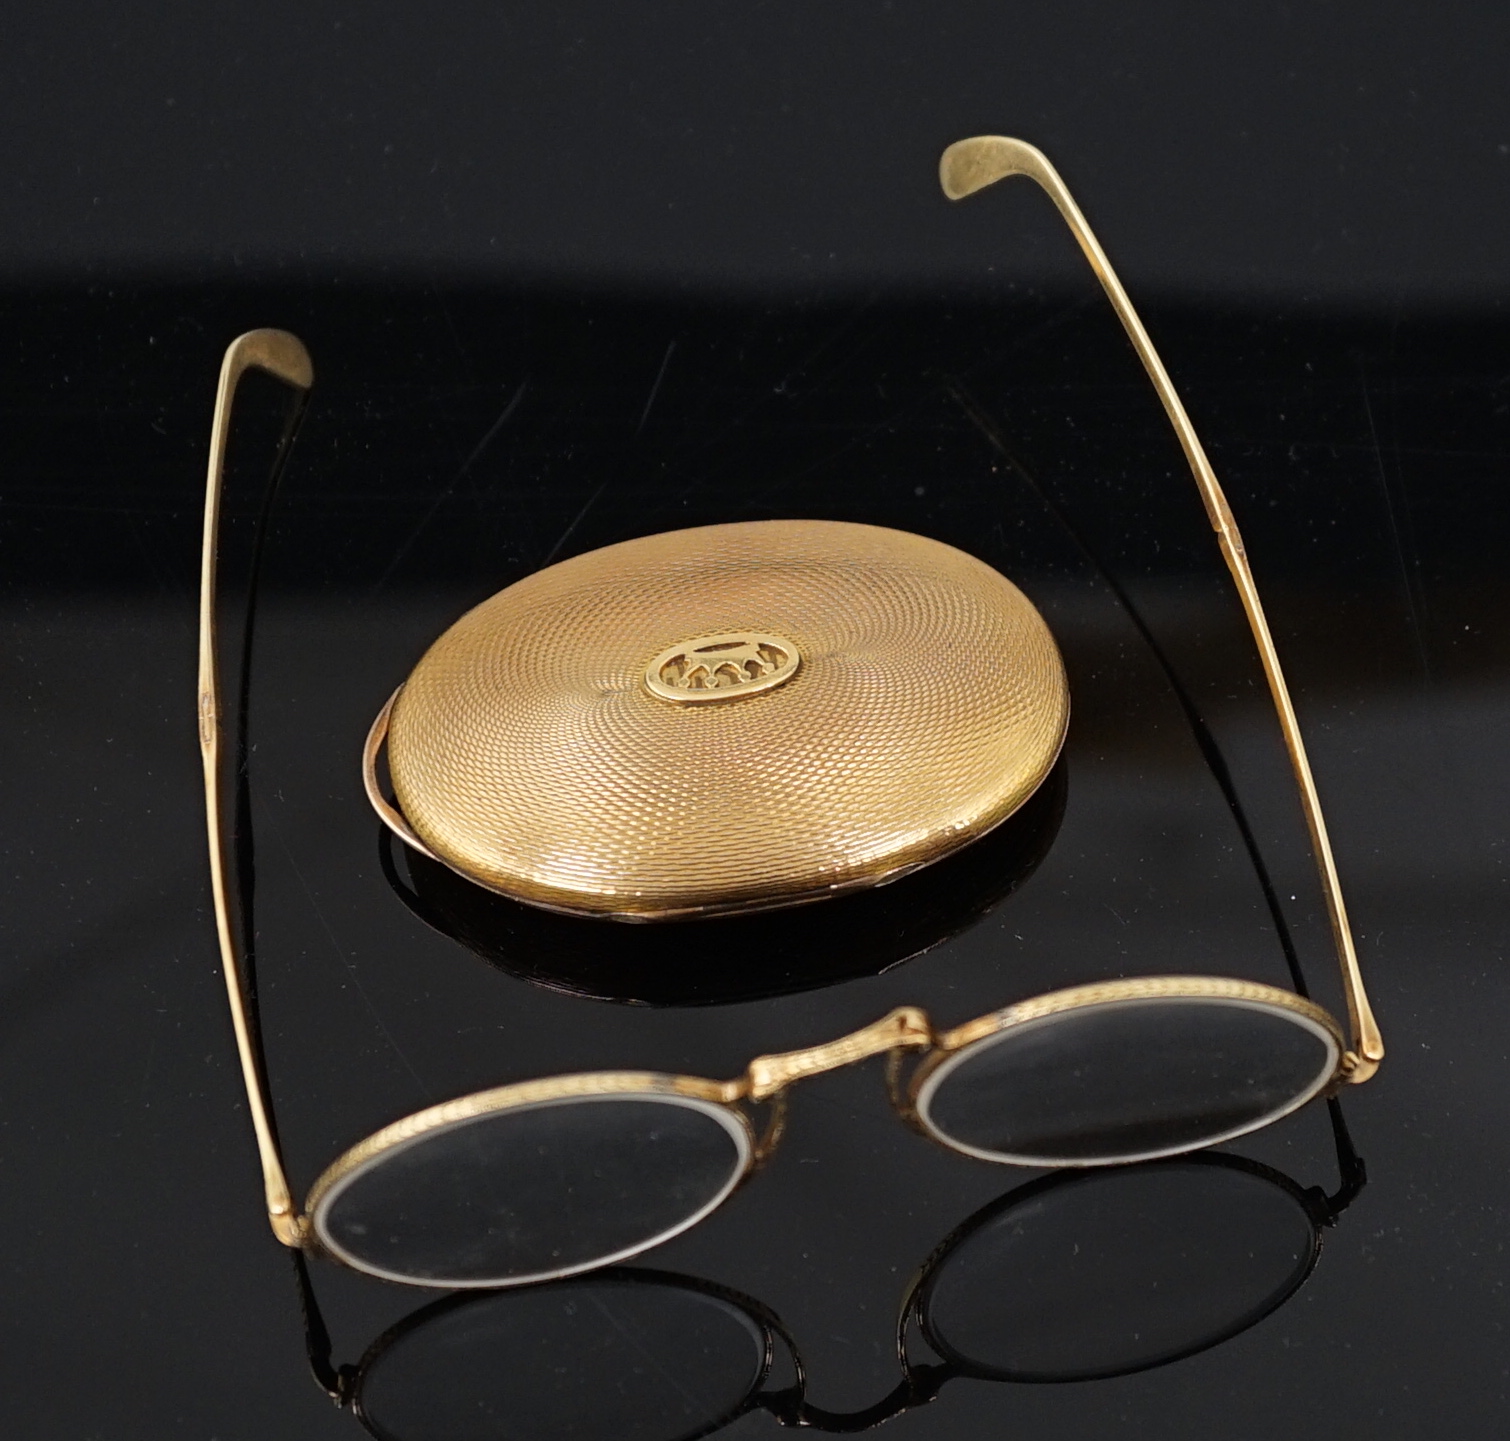 A pair of engraved gold mounted spectacles